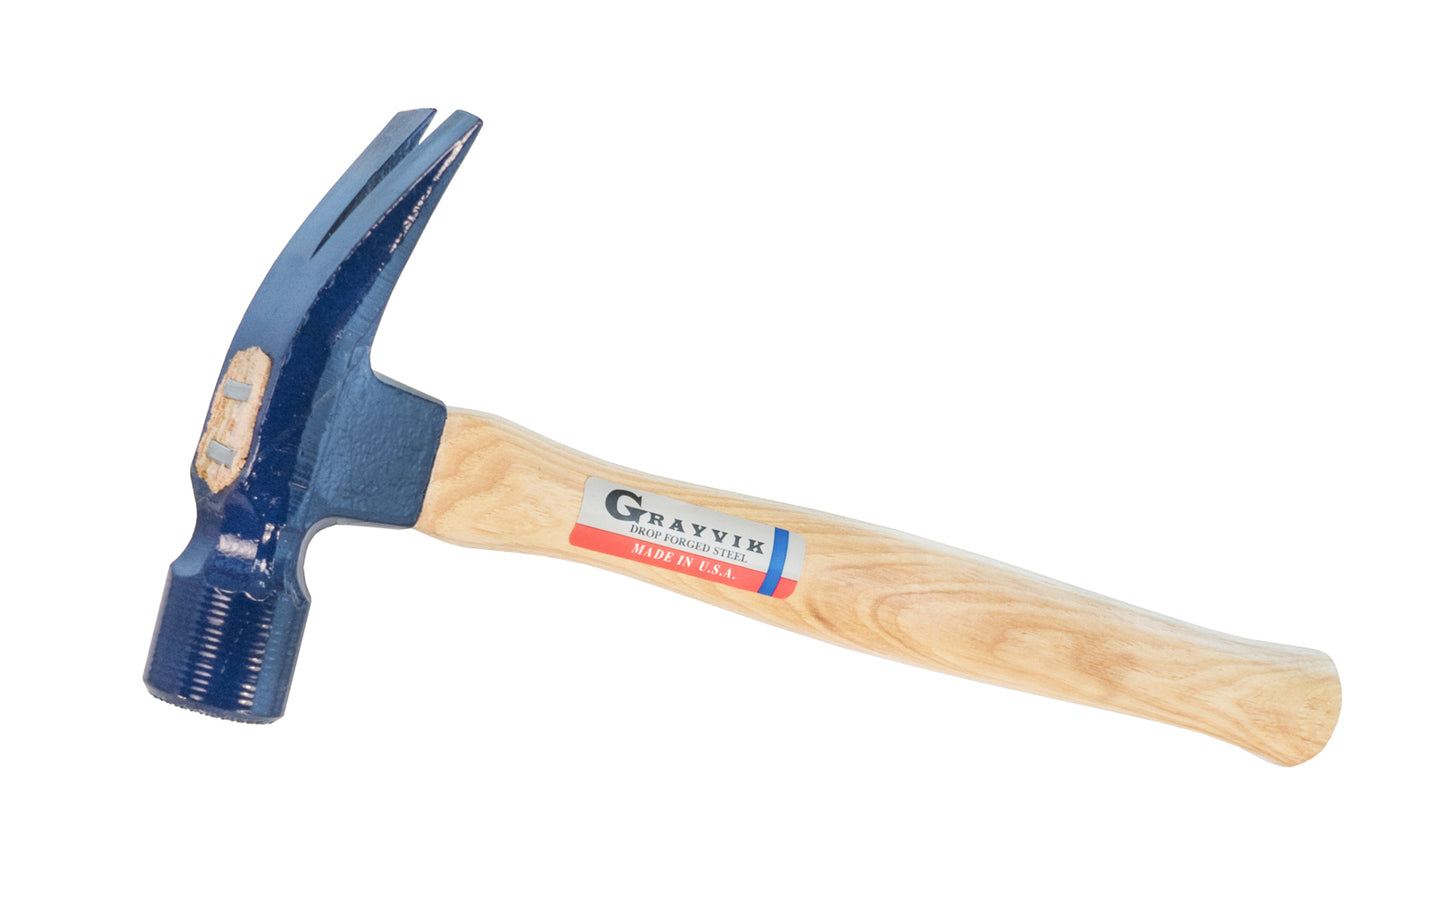 Grayvik No. 90079 Vaughan Grayvik 24 oz hammer is rip Hammer with a mill face. Rust-resistant powder coated finish. Straight Handle. Rust-resistant powder coated finish. Vaughan Factory Seconds Hammer. Made in USA. 051218900798